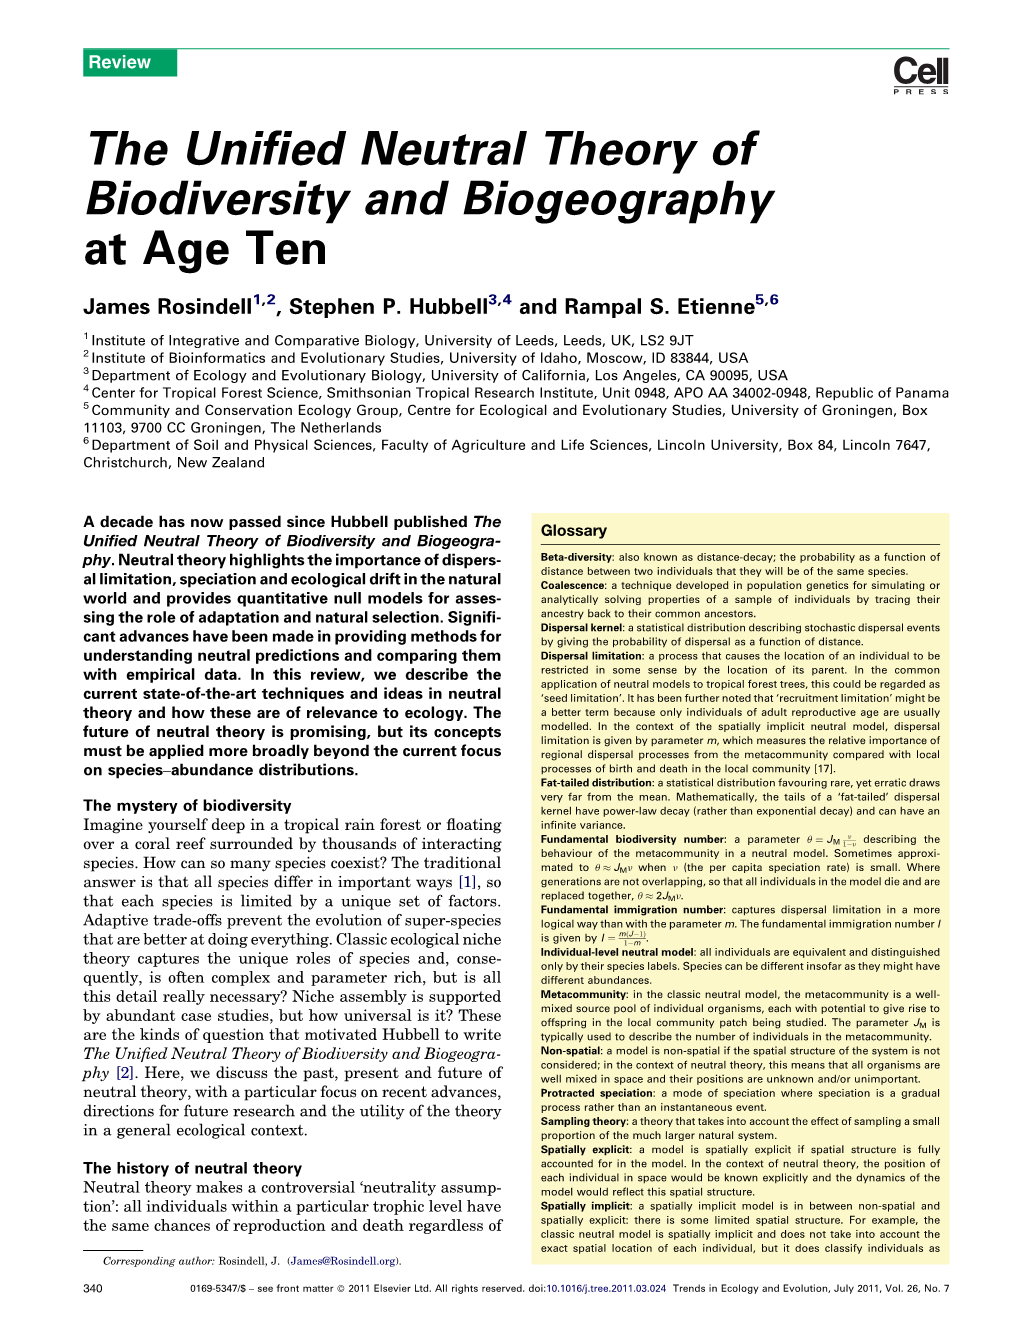 The Unified Neutral Theory of Biodiversity and Biogeography at Age